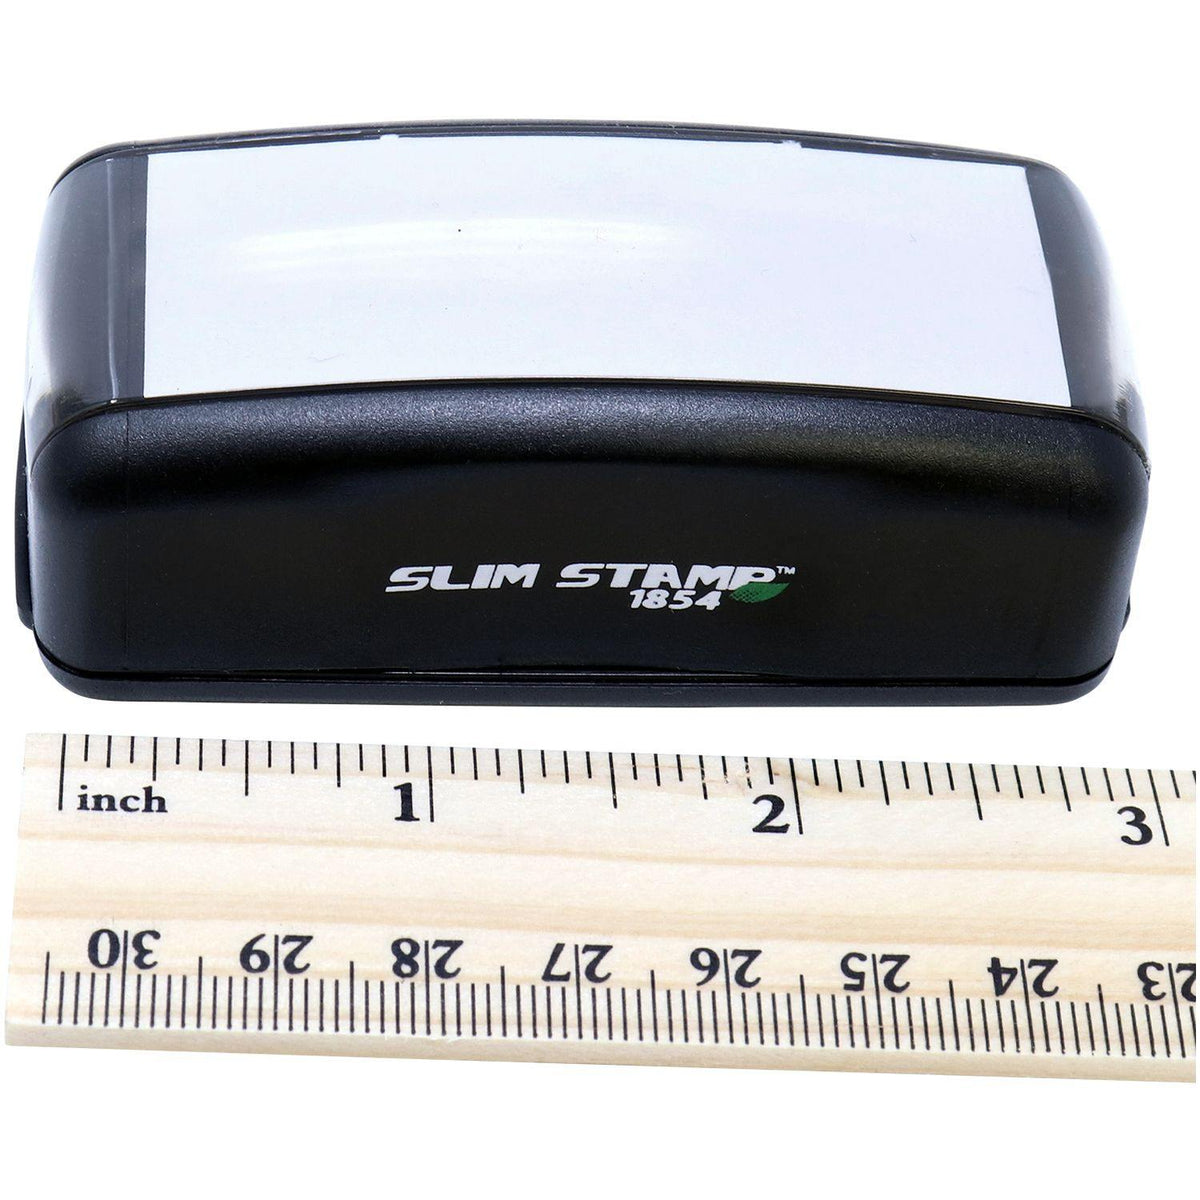 Measurement Large Pre Inked E Mail Stamp with Ruler